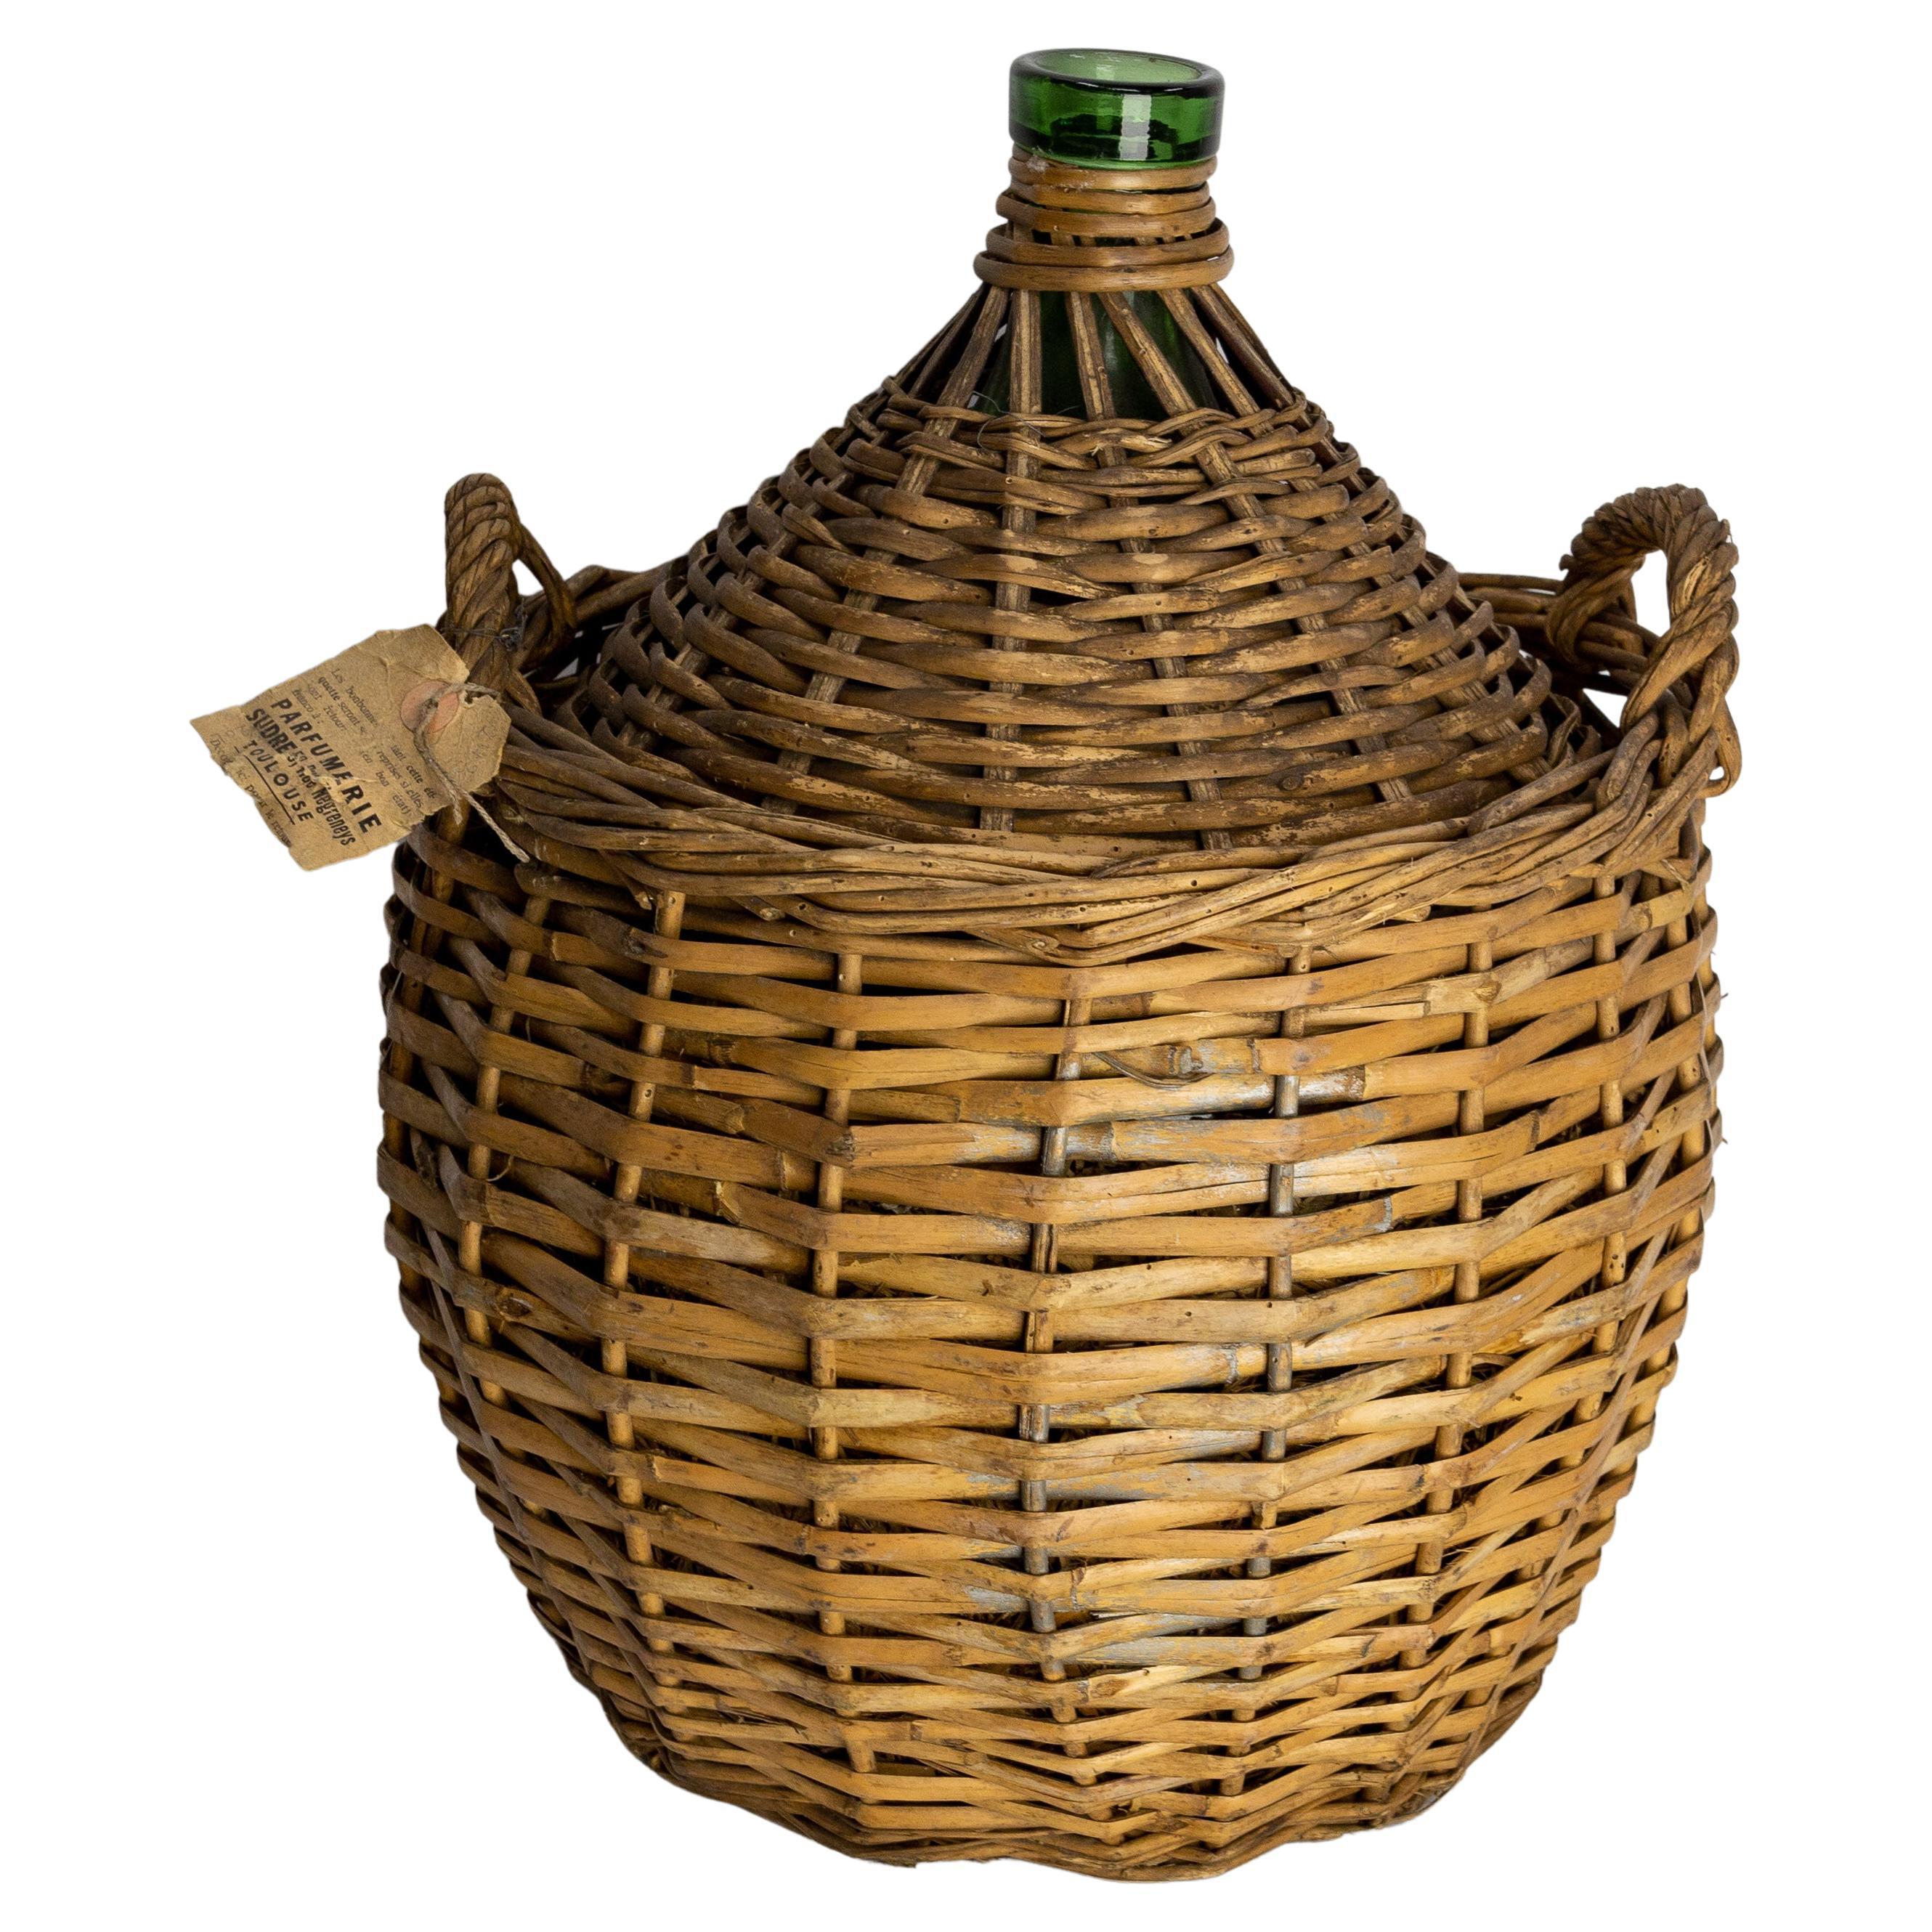 Antique Greenglass Bottle Demijohns or Carboy in Authentic Wicker Basket, France